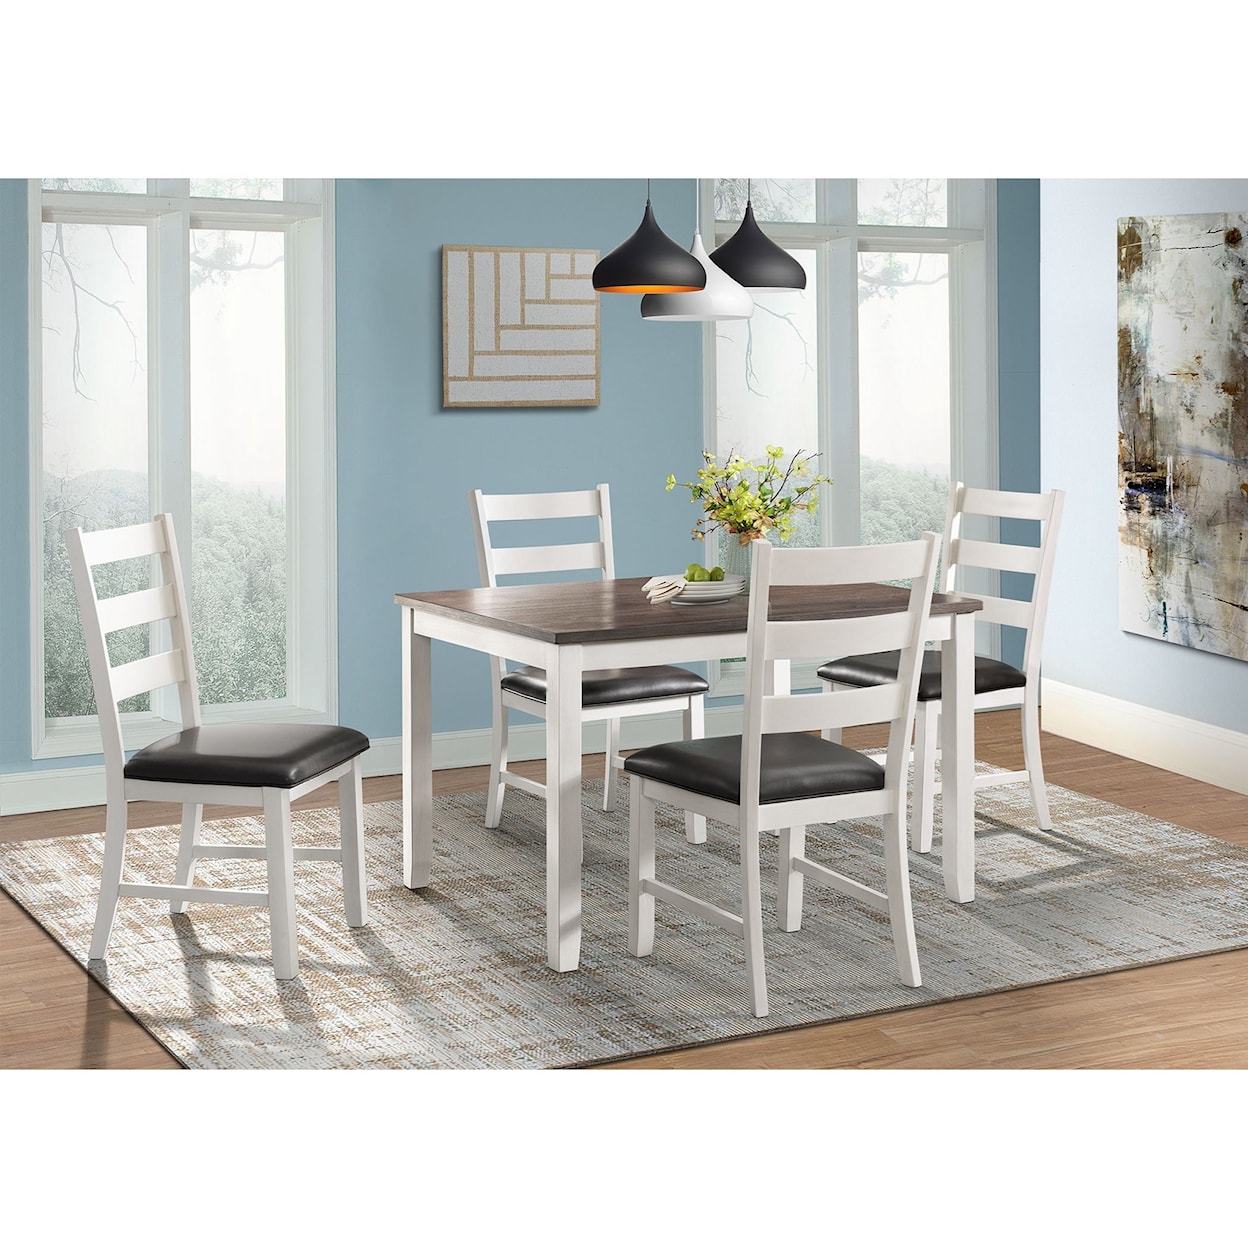 Elements International Martin Dining Table and Chair Set